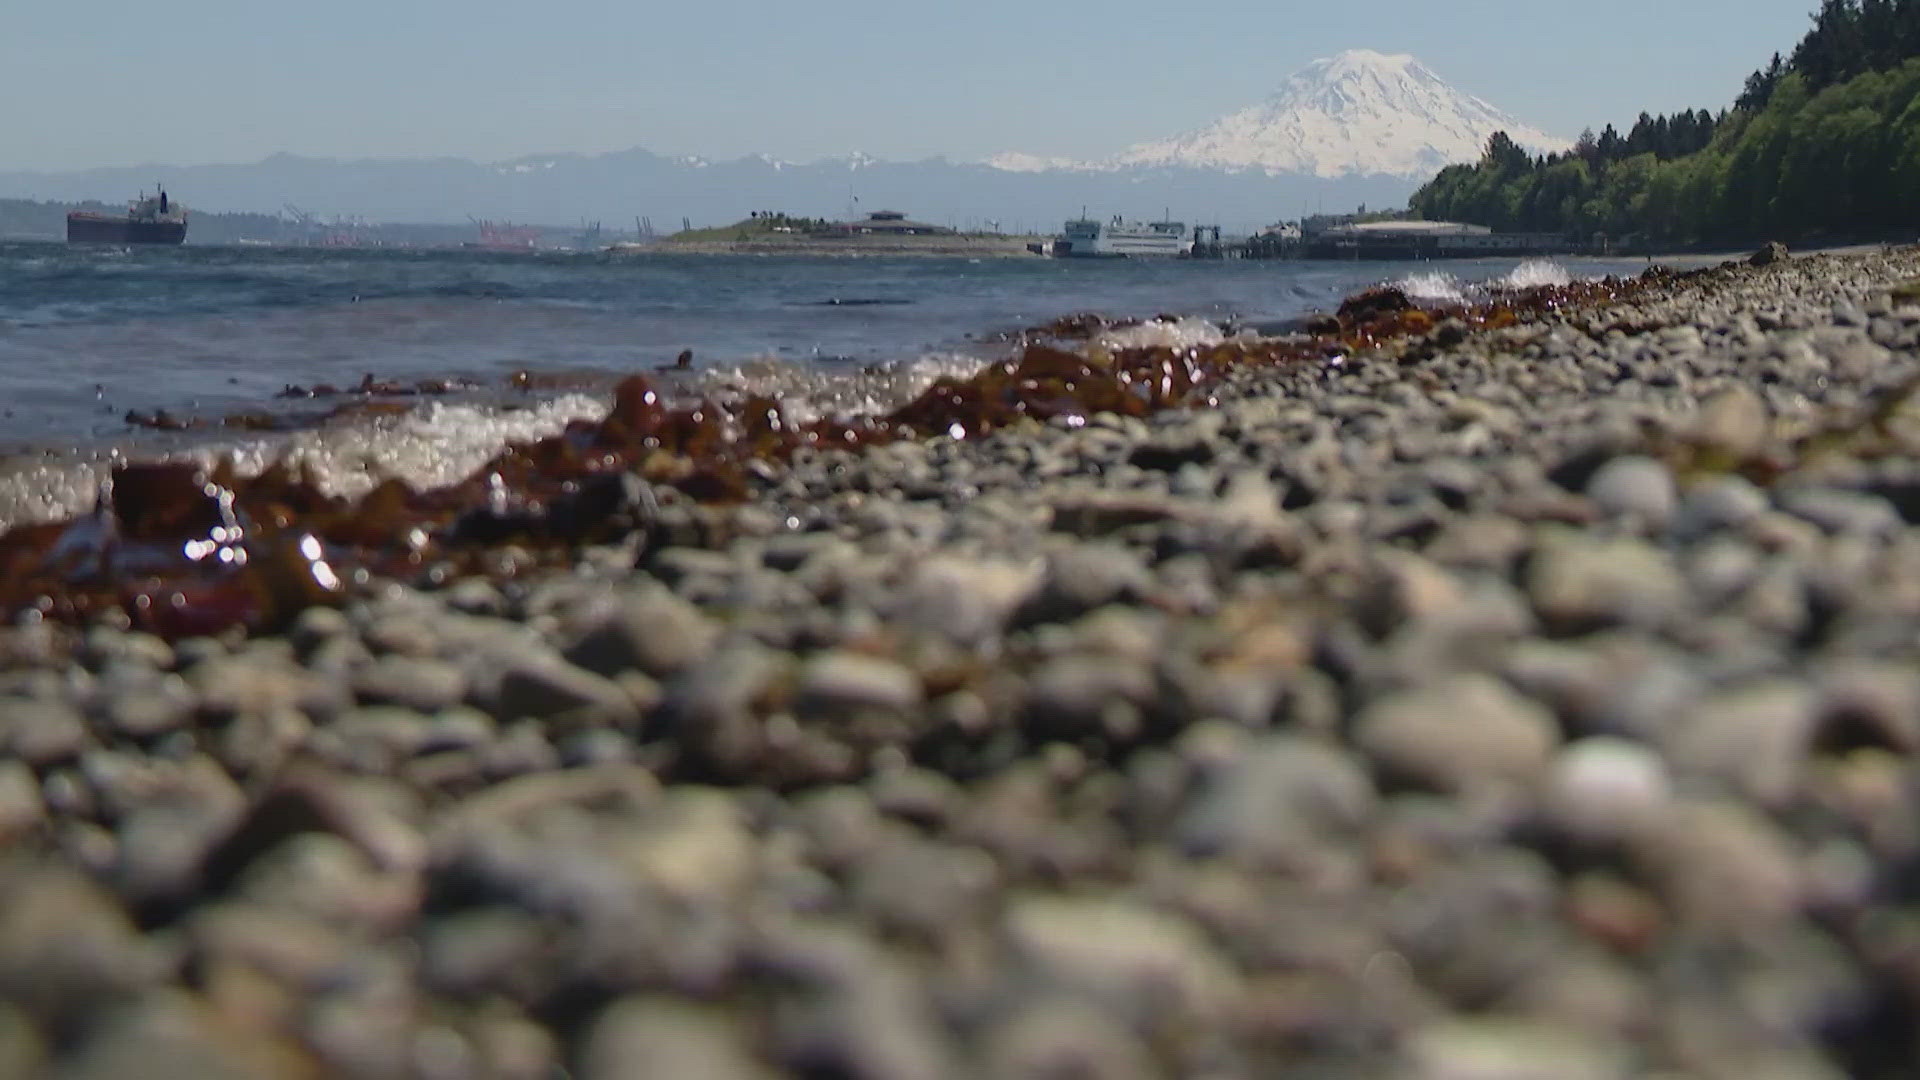 On Thursday, a low tide of -3.2 will reveal marine life on beaches across western Washington.